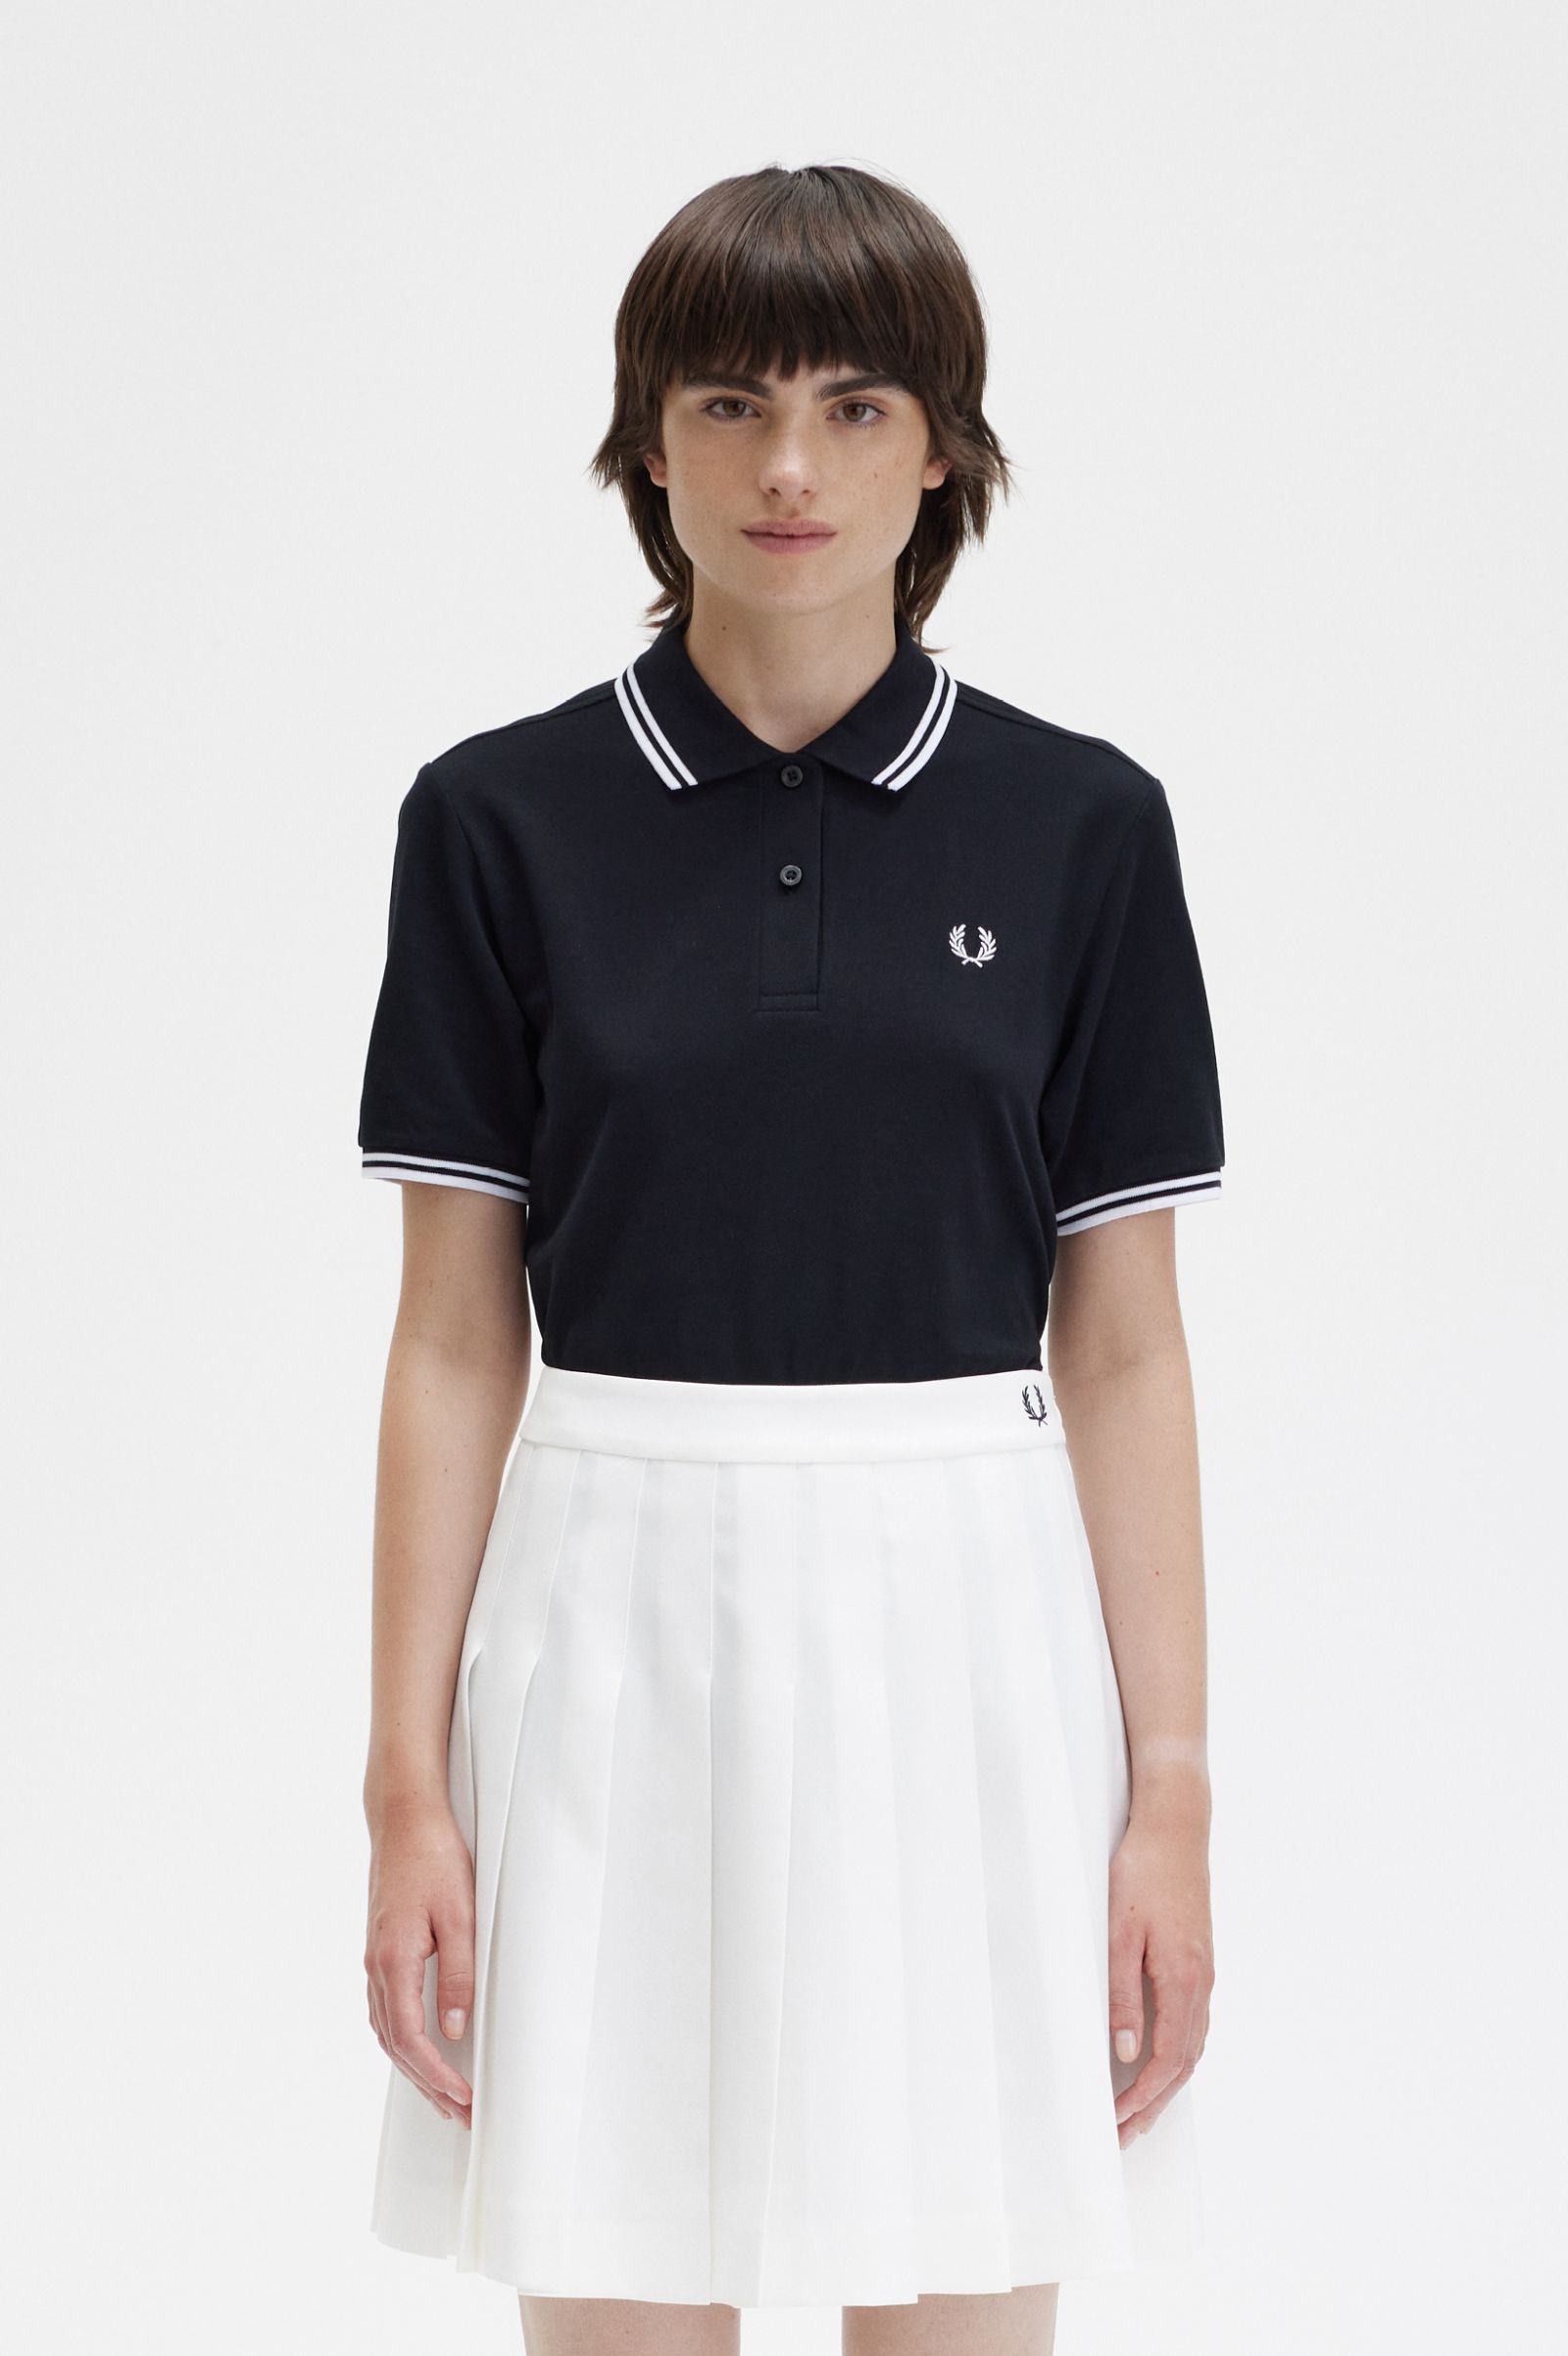 Voldoen markt Plasticiteit G3600 - Black / White / White | The Fred Perry Shirt | Women's Short & Long  Sleeve Shirts | Fred Perry US